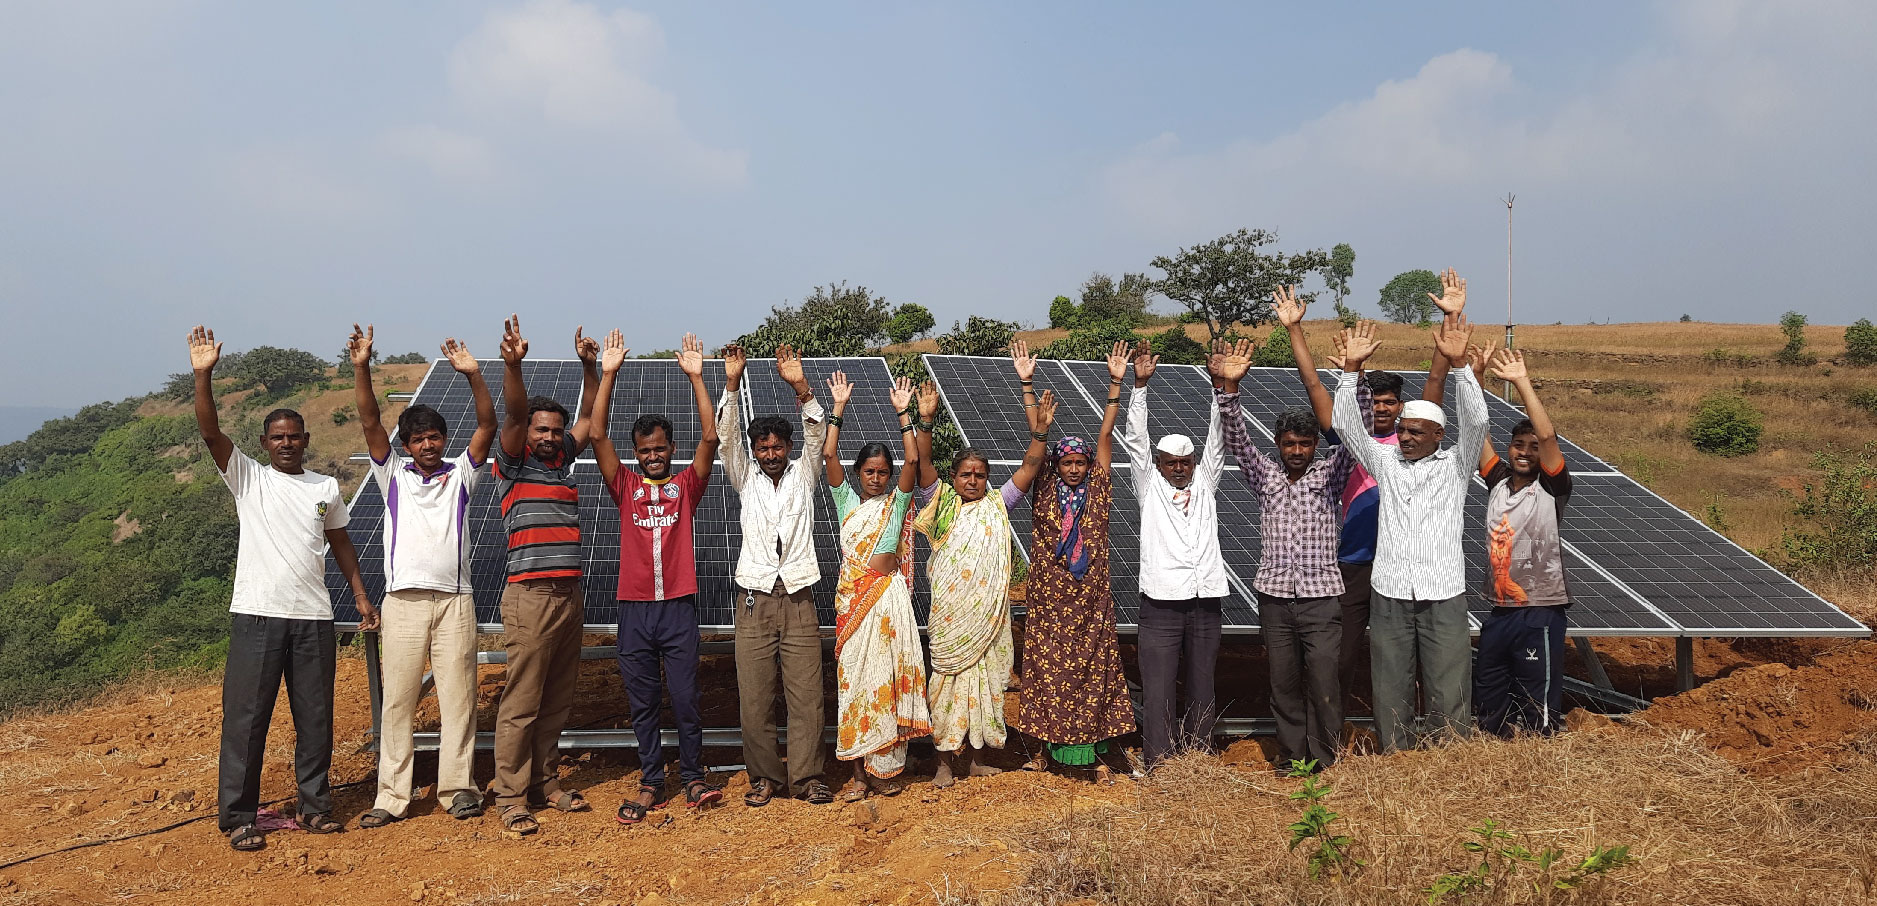 Green Fields, Bright Futures: SMA Advances Rural Communities with Solar Irrigation